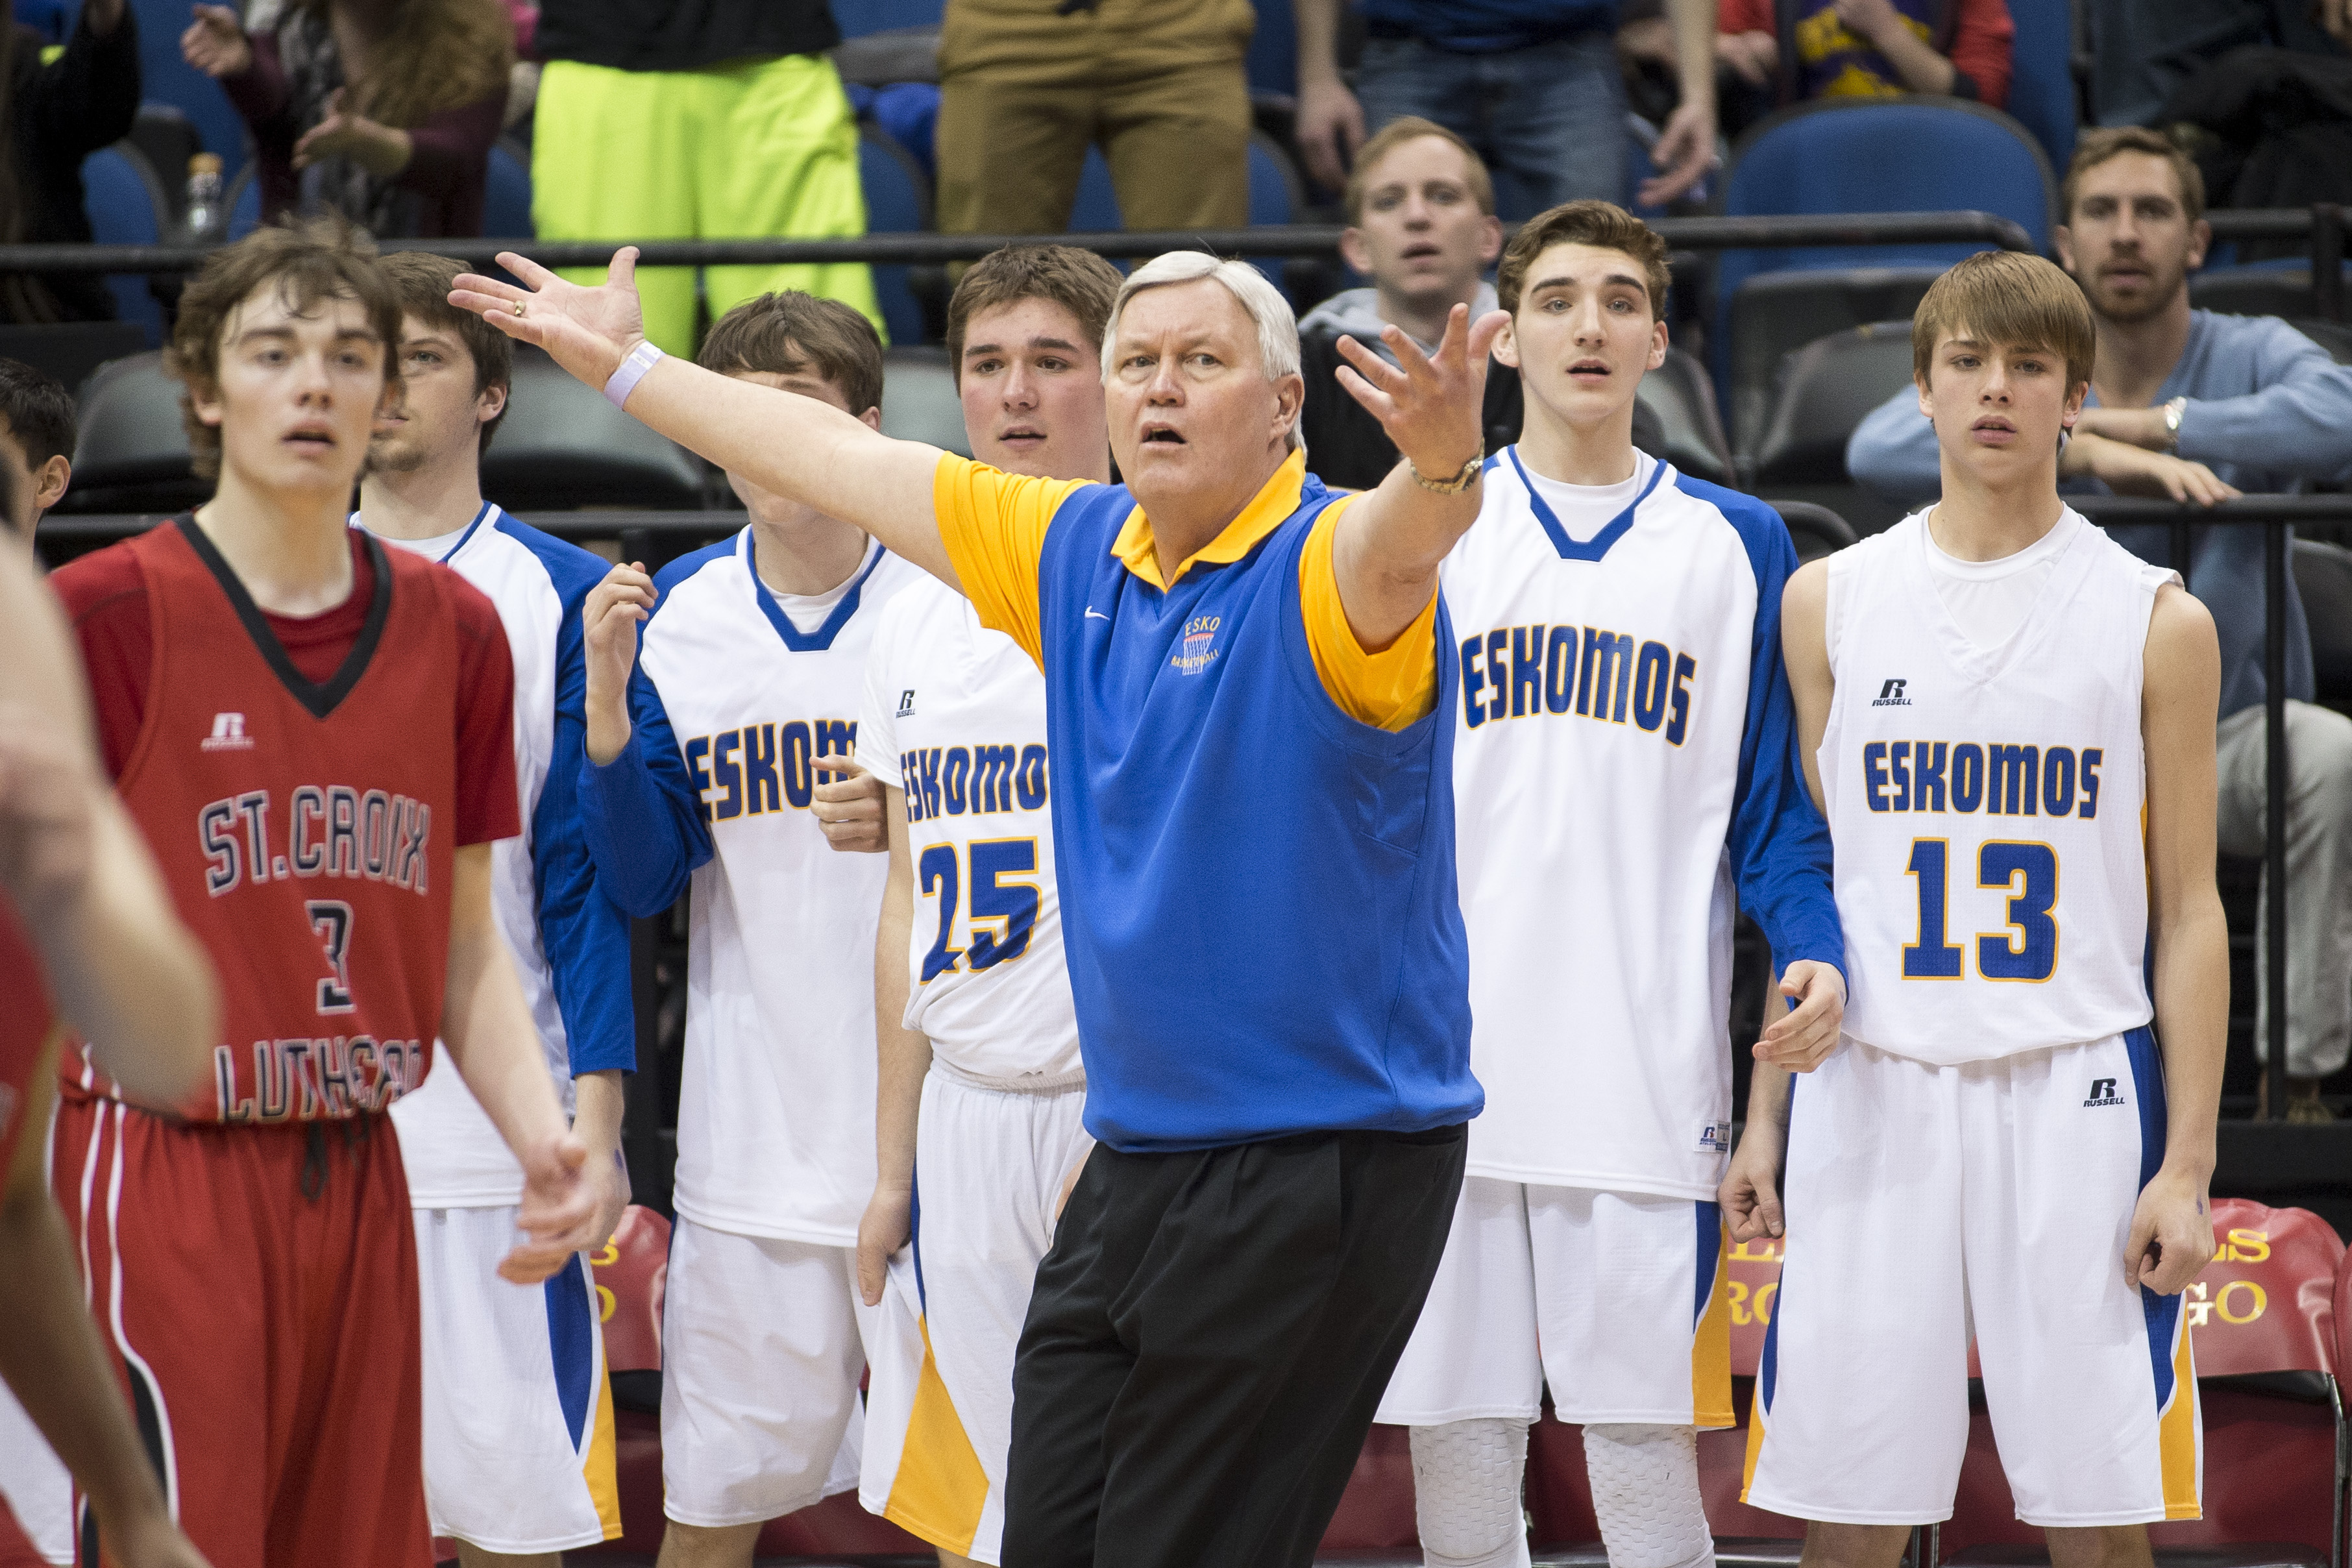 Esko head coach Mike Devney gestured to the referees after he thought one of his players was fouled in the final seconds of Wednesday night's game quarterfinal game against St. Croix Lutheran. ] (Aaron Lavinsky | StarTribune)   Esko plays St. Croix Lutheran in the Class 2A boys' basketball quarterfinals on Wednesday, March 11, 2015 at Target Center.